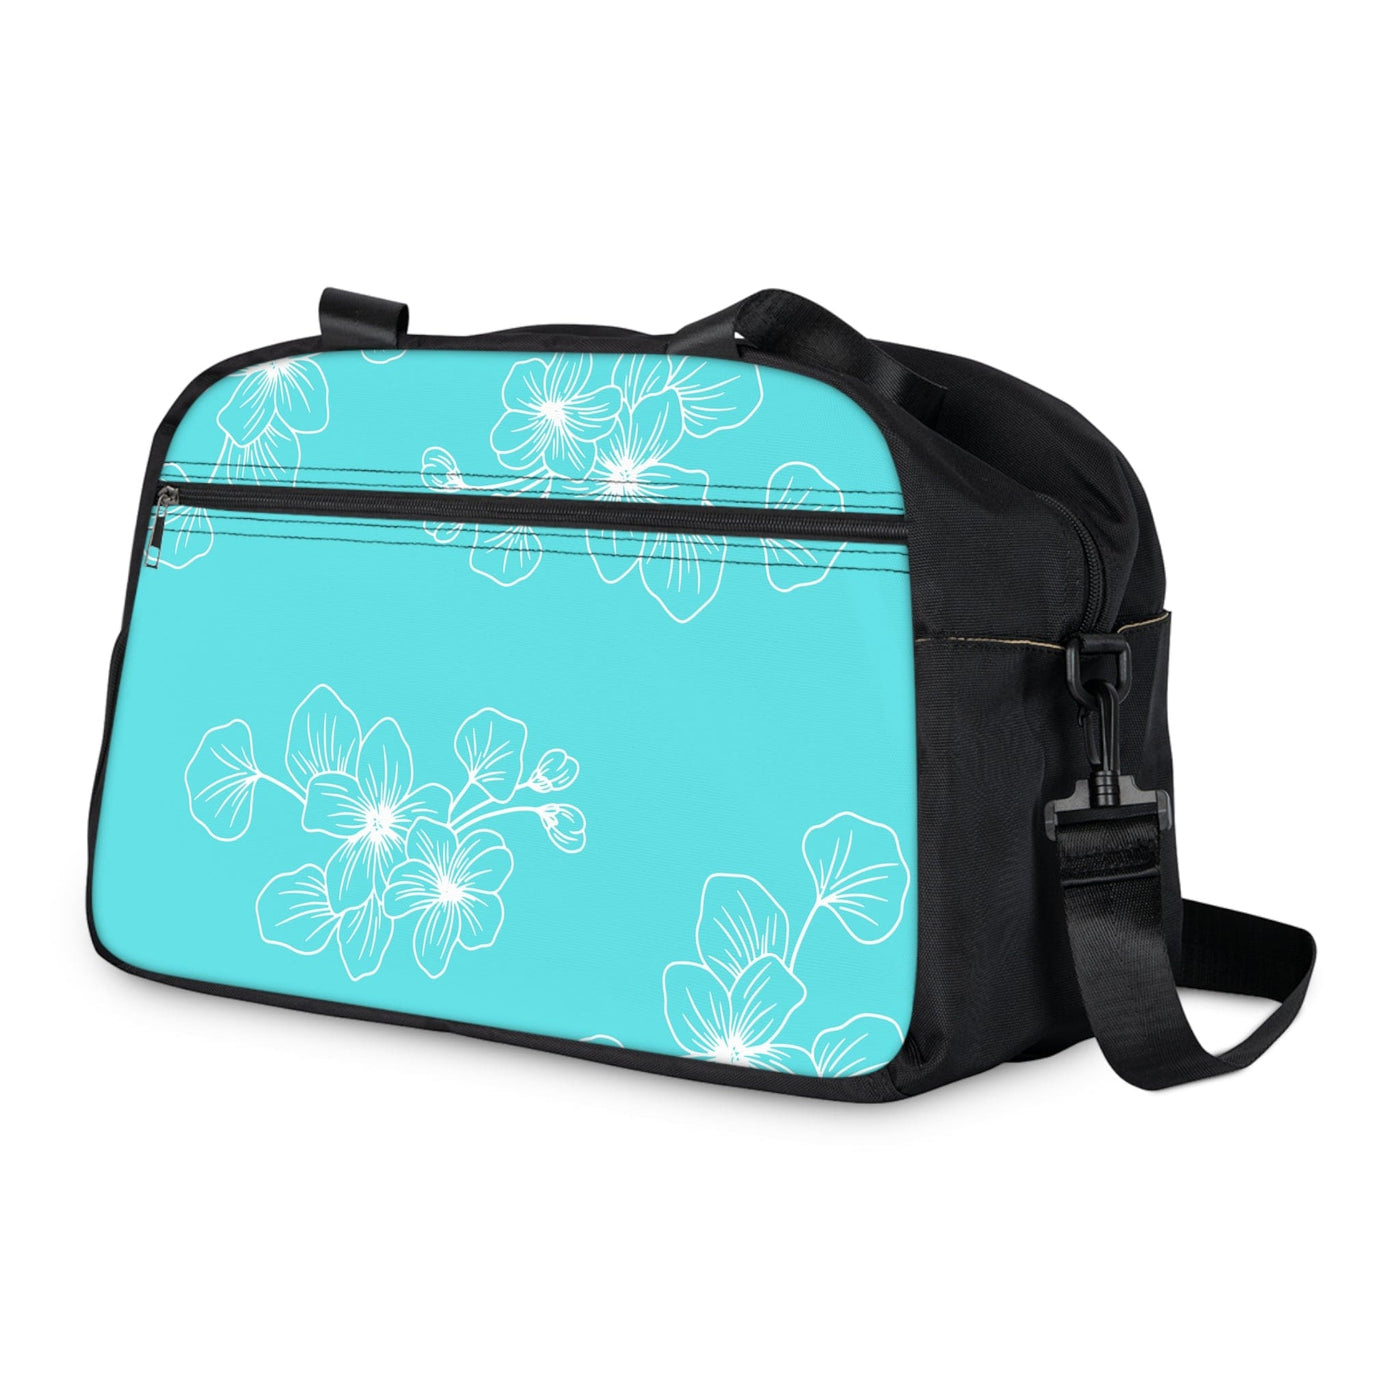 Travel Fitness Bag Floral Cyan Blue 7022523 - Bags